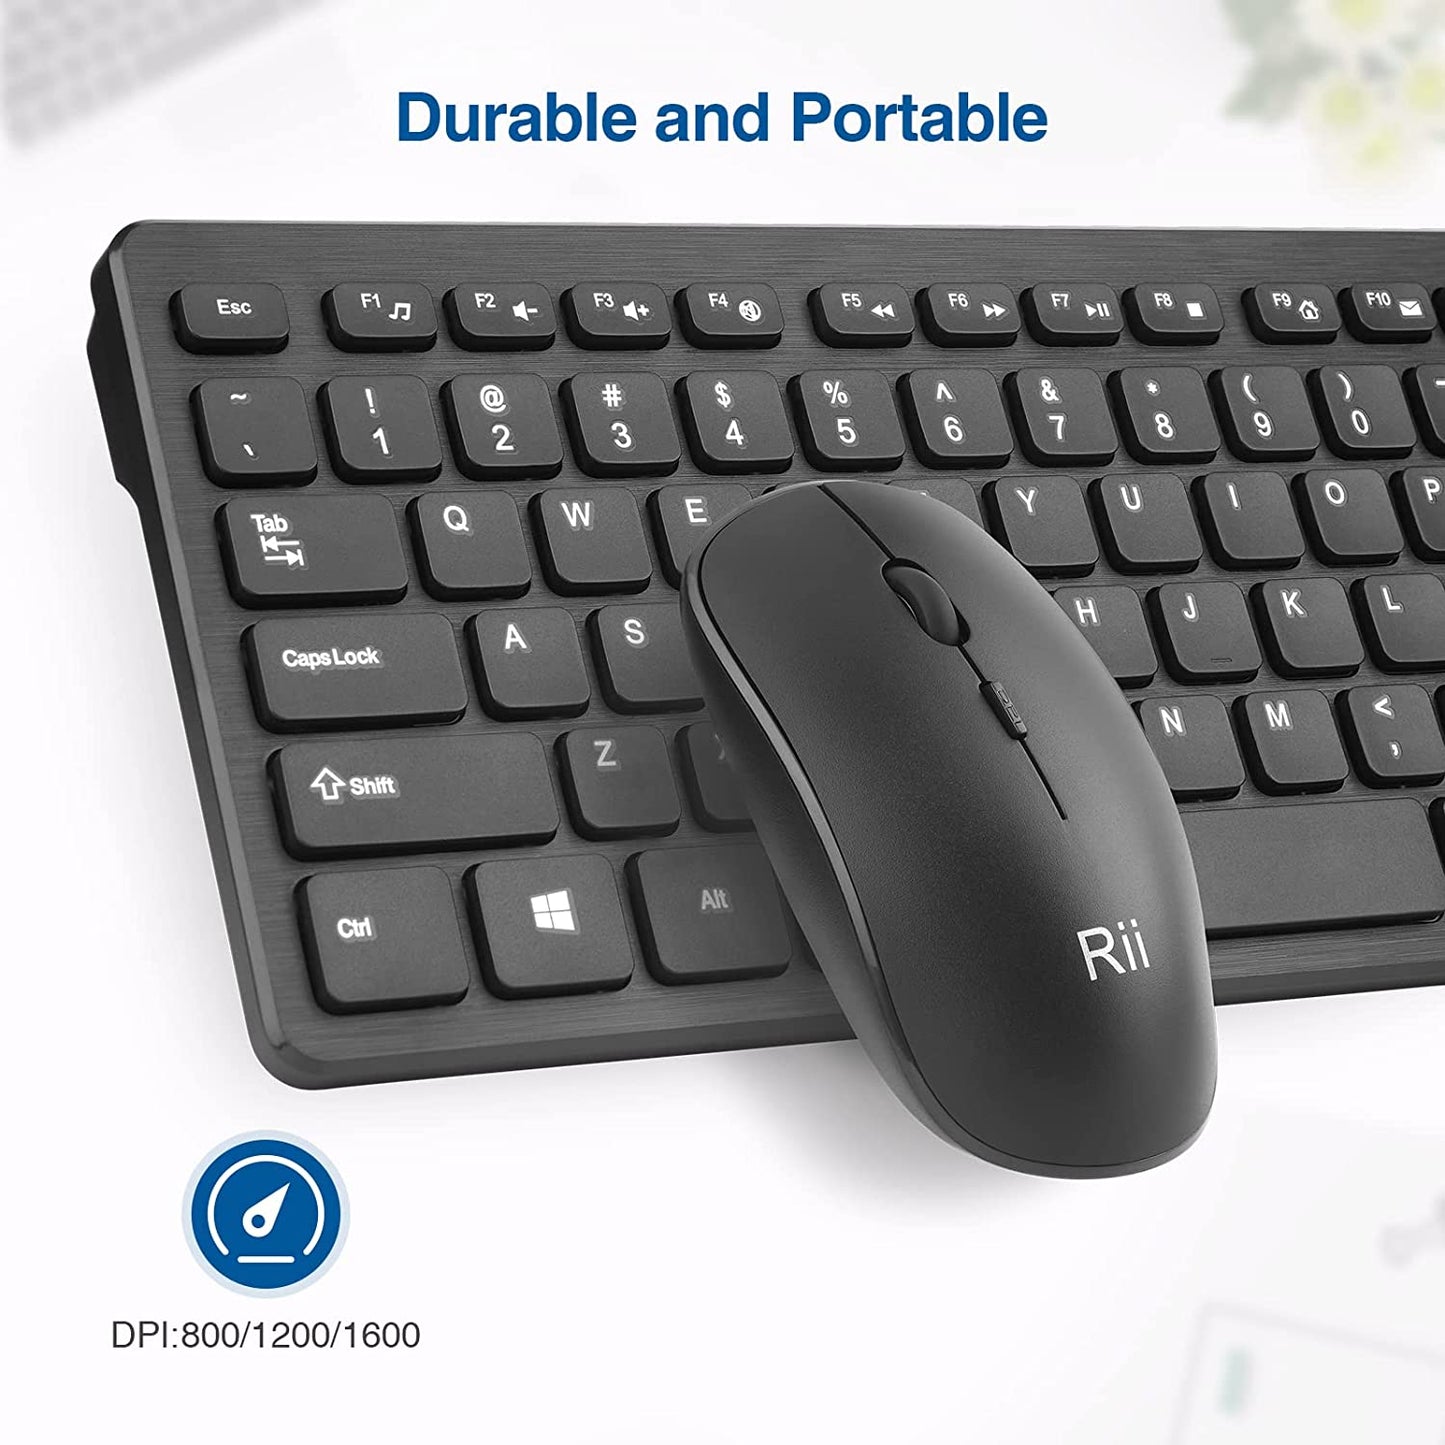 Wireless Keyboard and Mouse Combo - Rii